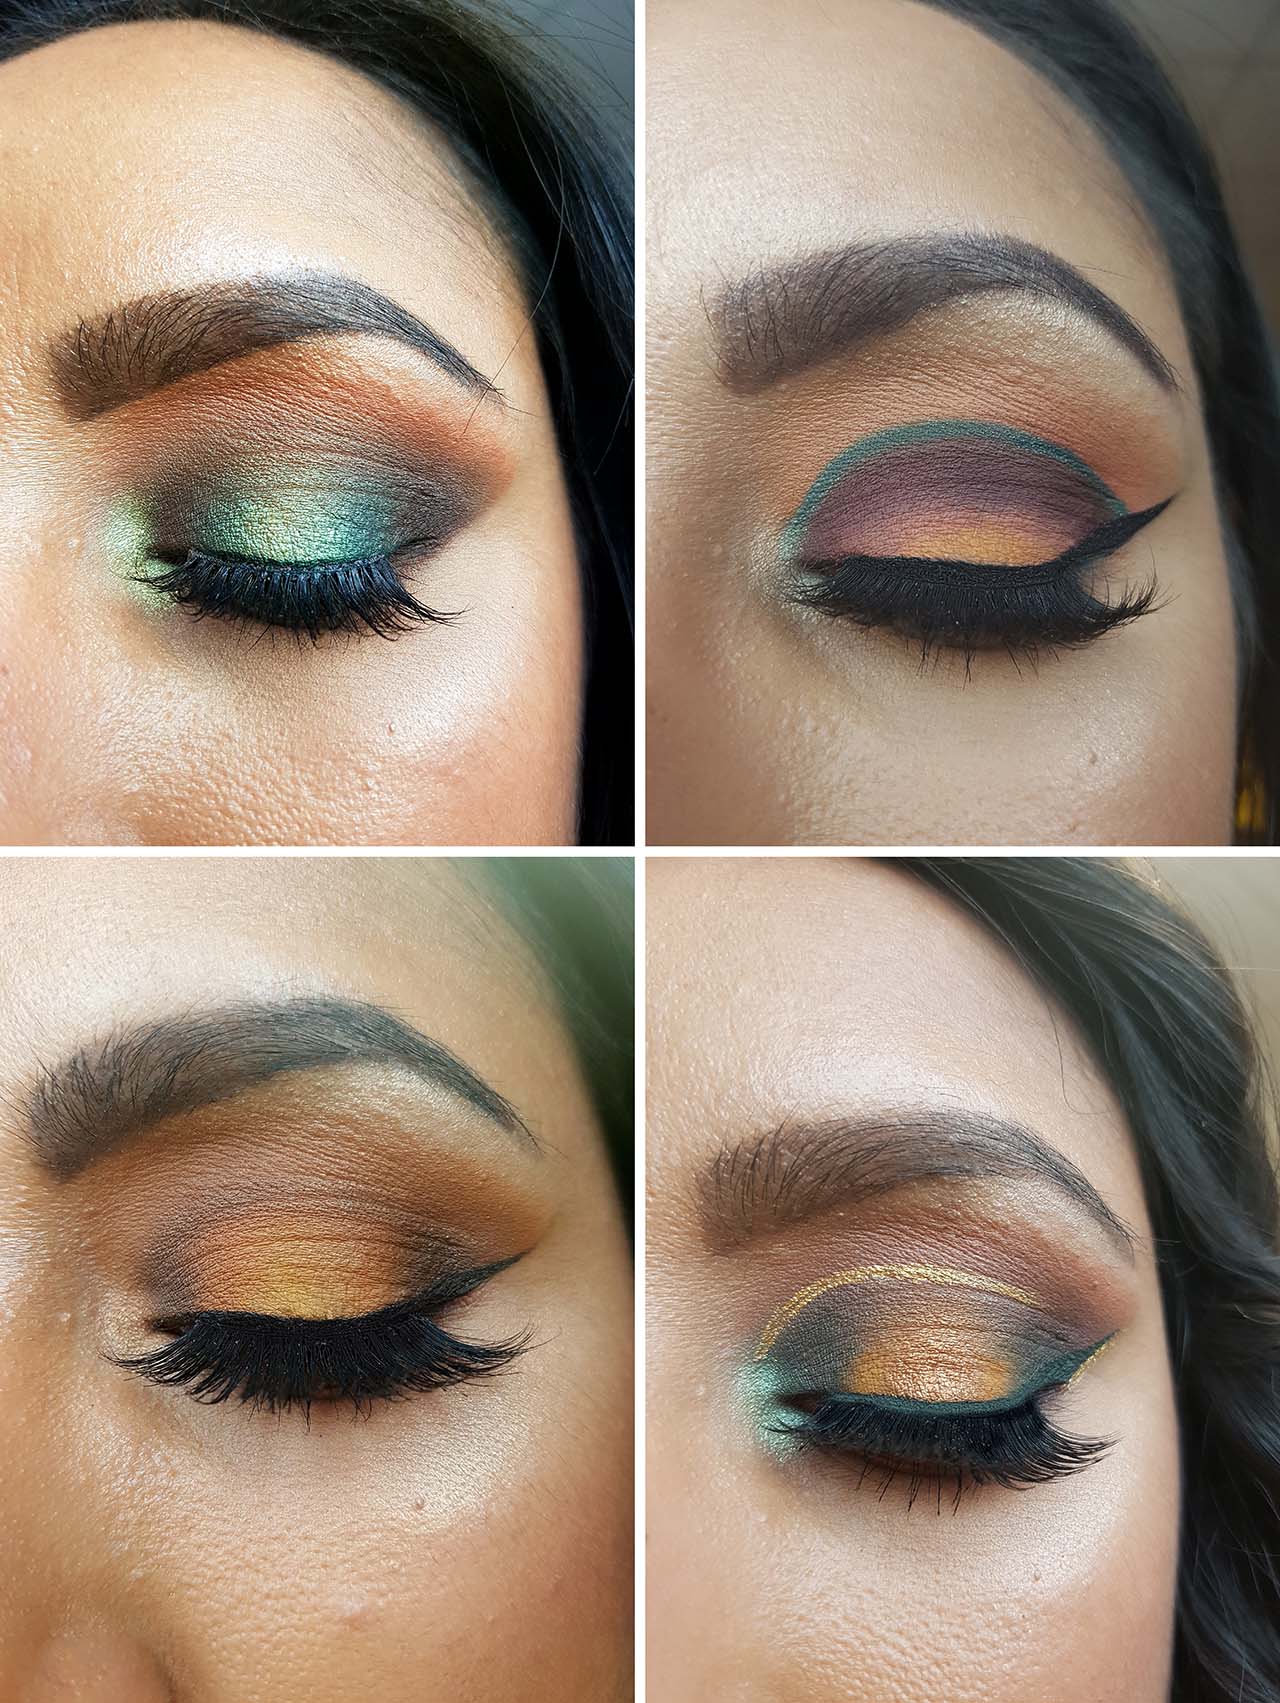 The Subculture Palette by ABH – Why All The Controversy: Whilst many people thought the colour choices were at best unusual and at worst completely incompatible and clashing, I thought they could work really together and I loved the fact that ABH turned conventional colour selection on its head! I have already created a few looks with the palette and love inventing more!